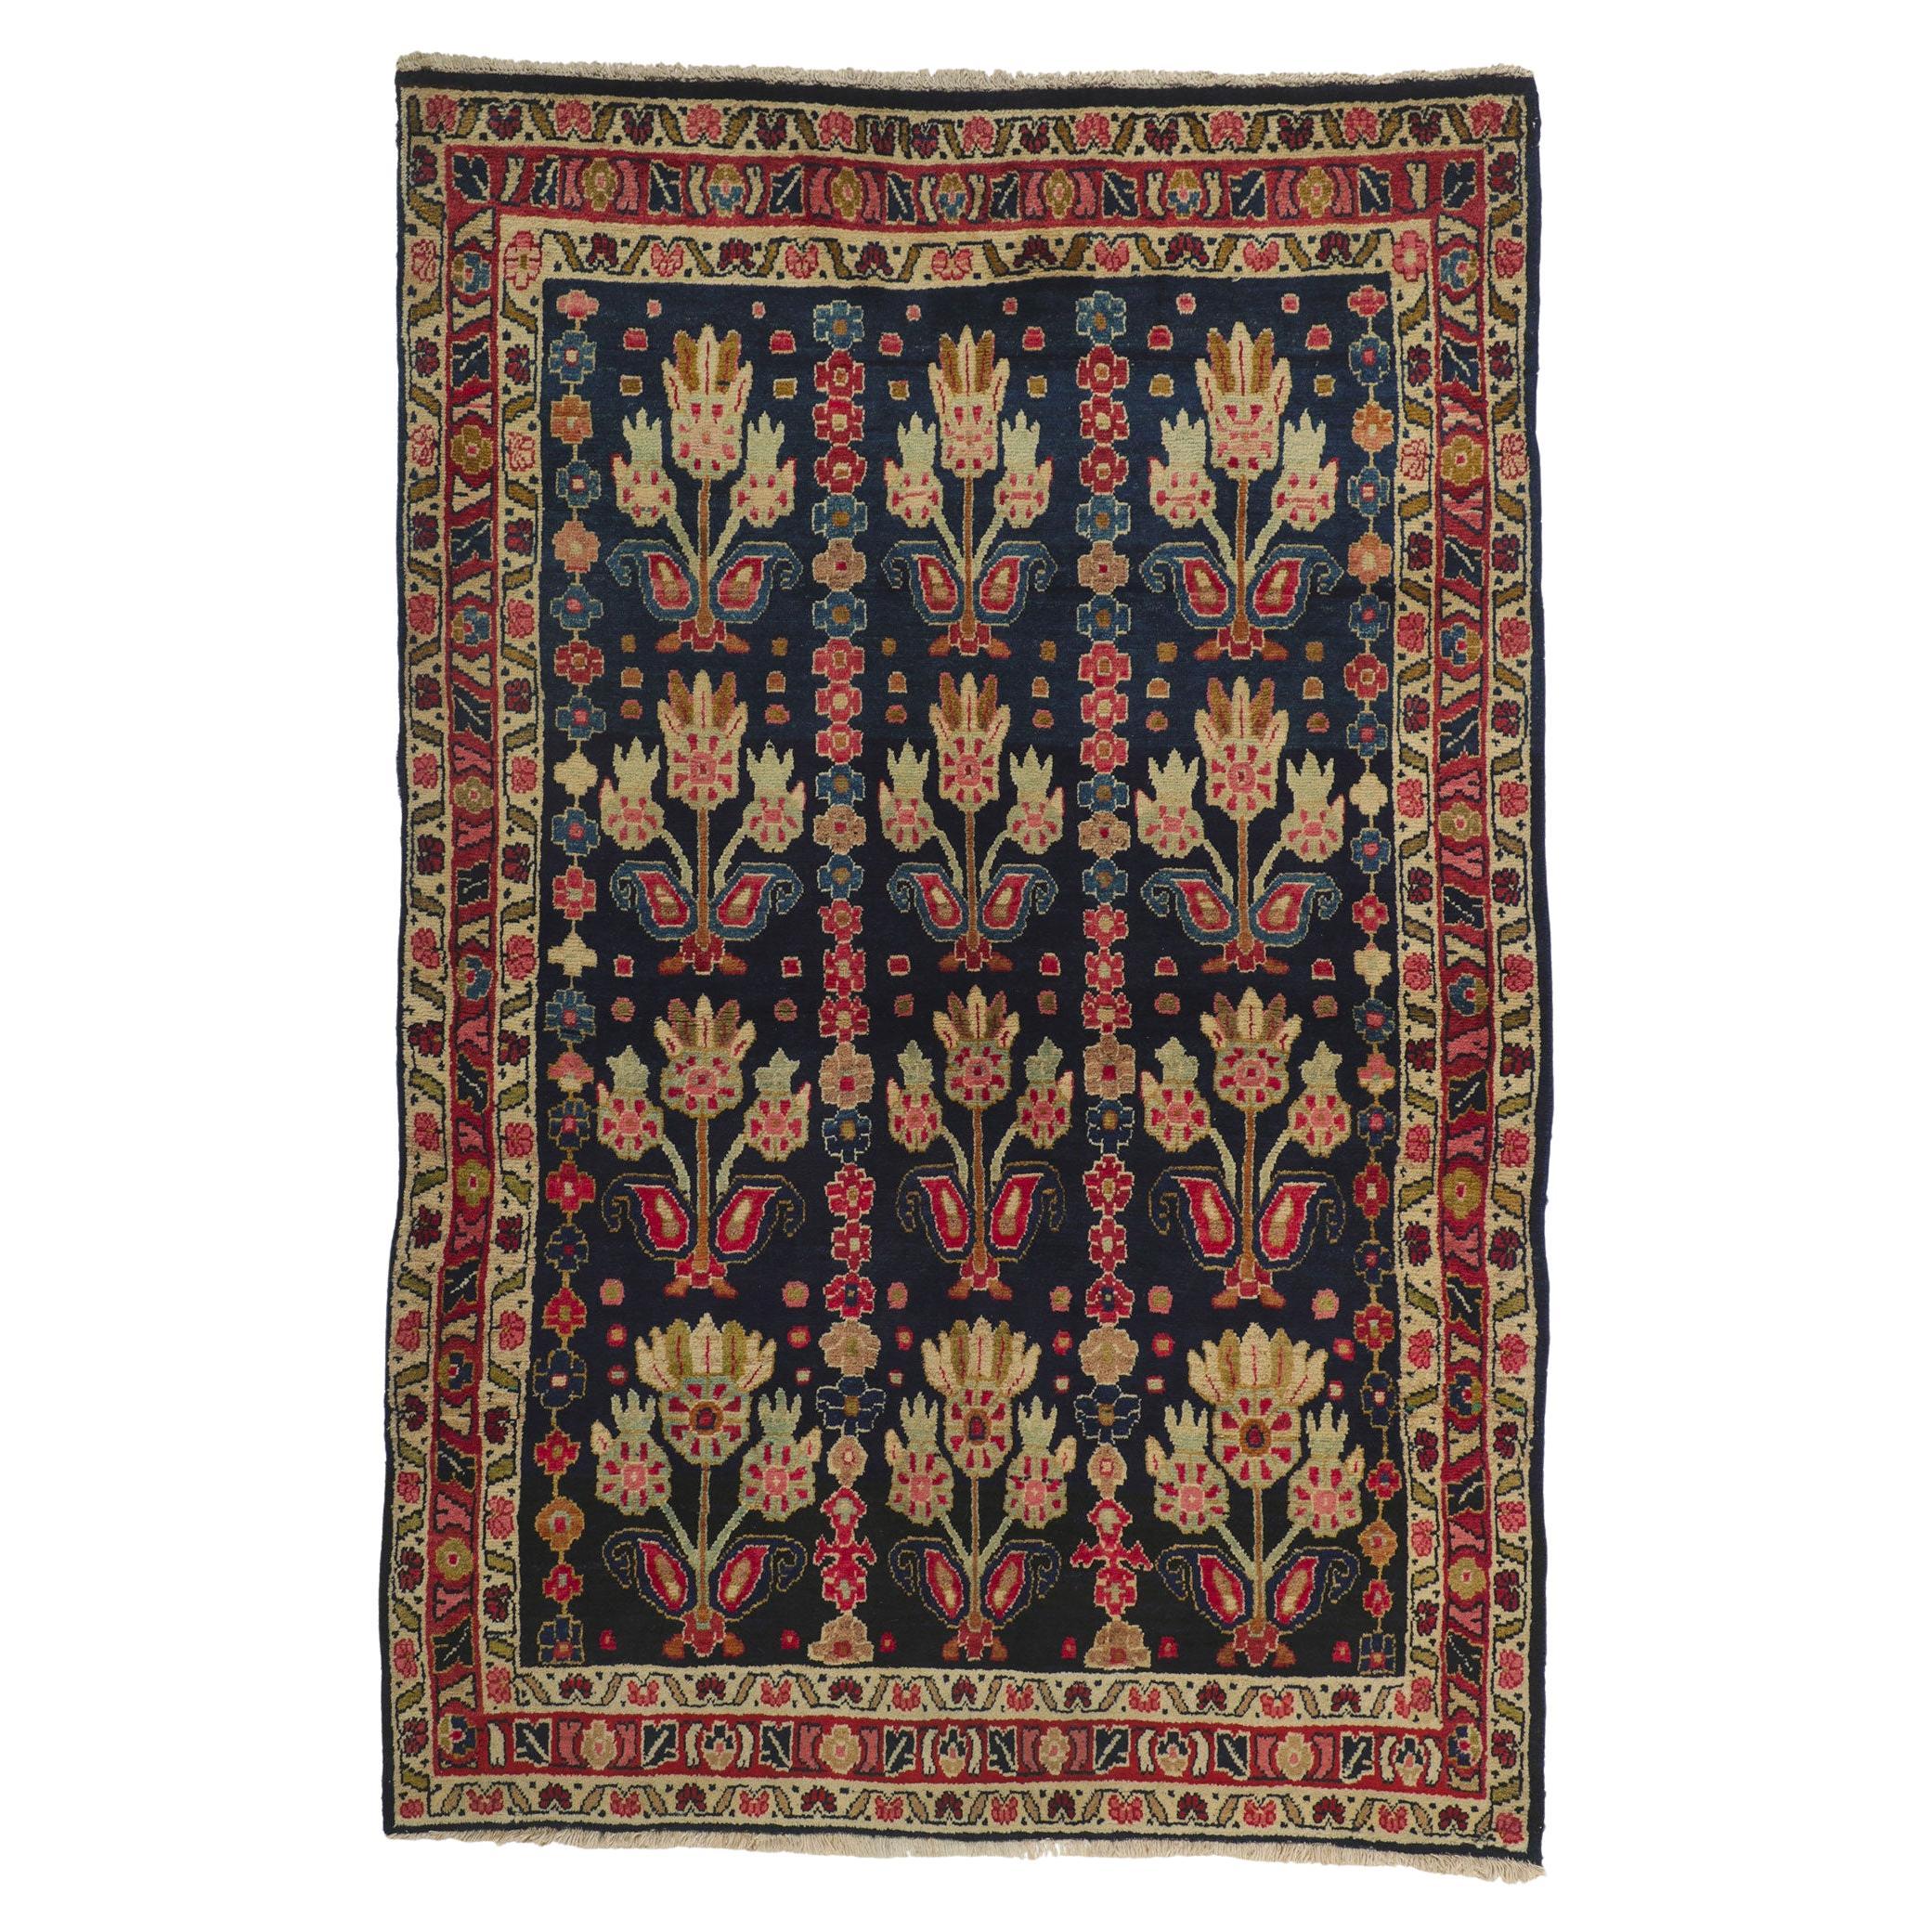 Antique Persian Mahal Rug, Timeless Elegance Meets Cultivated Beauty